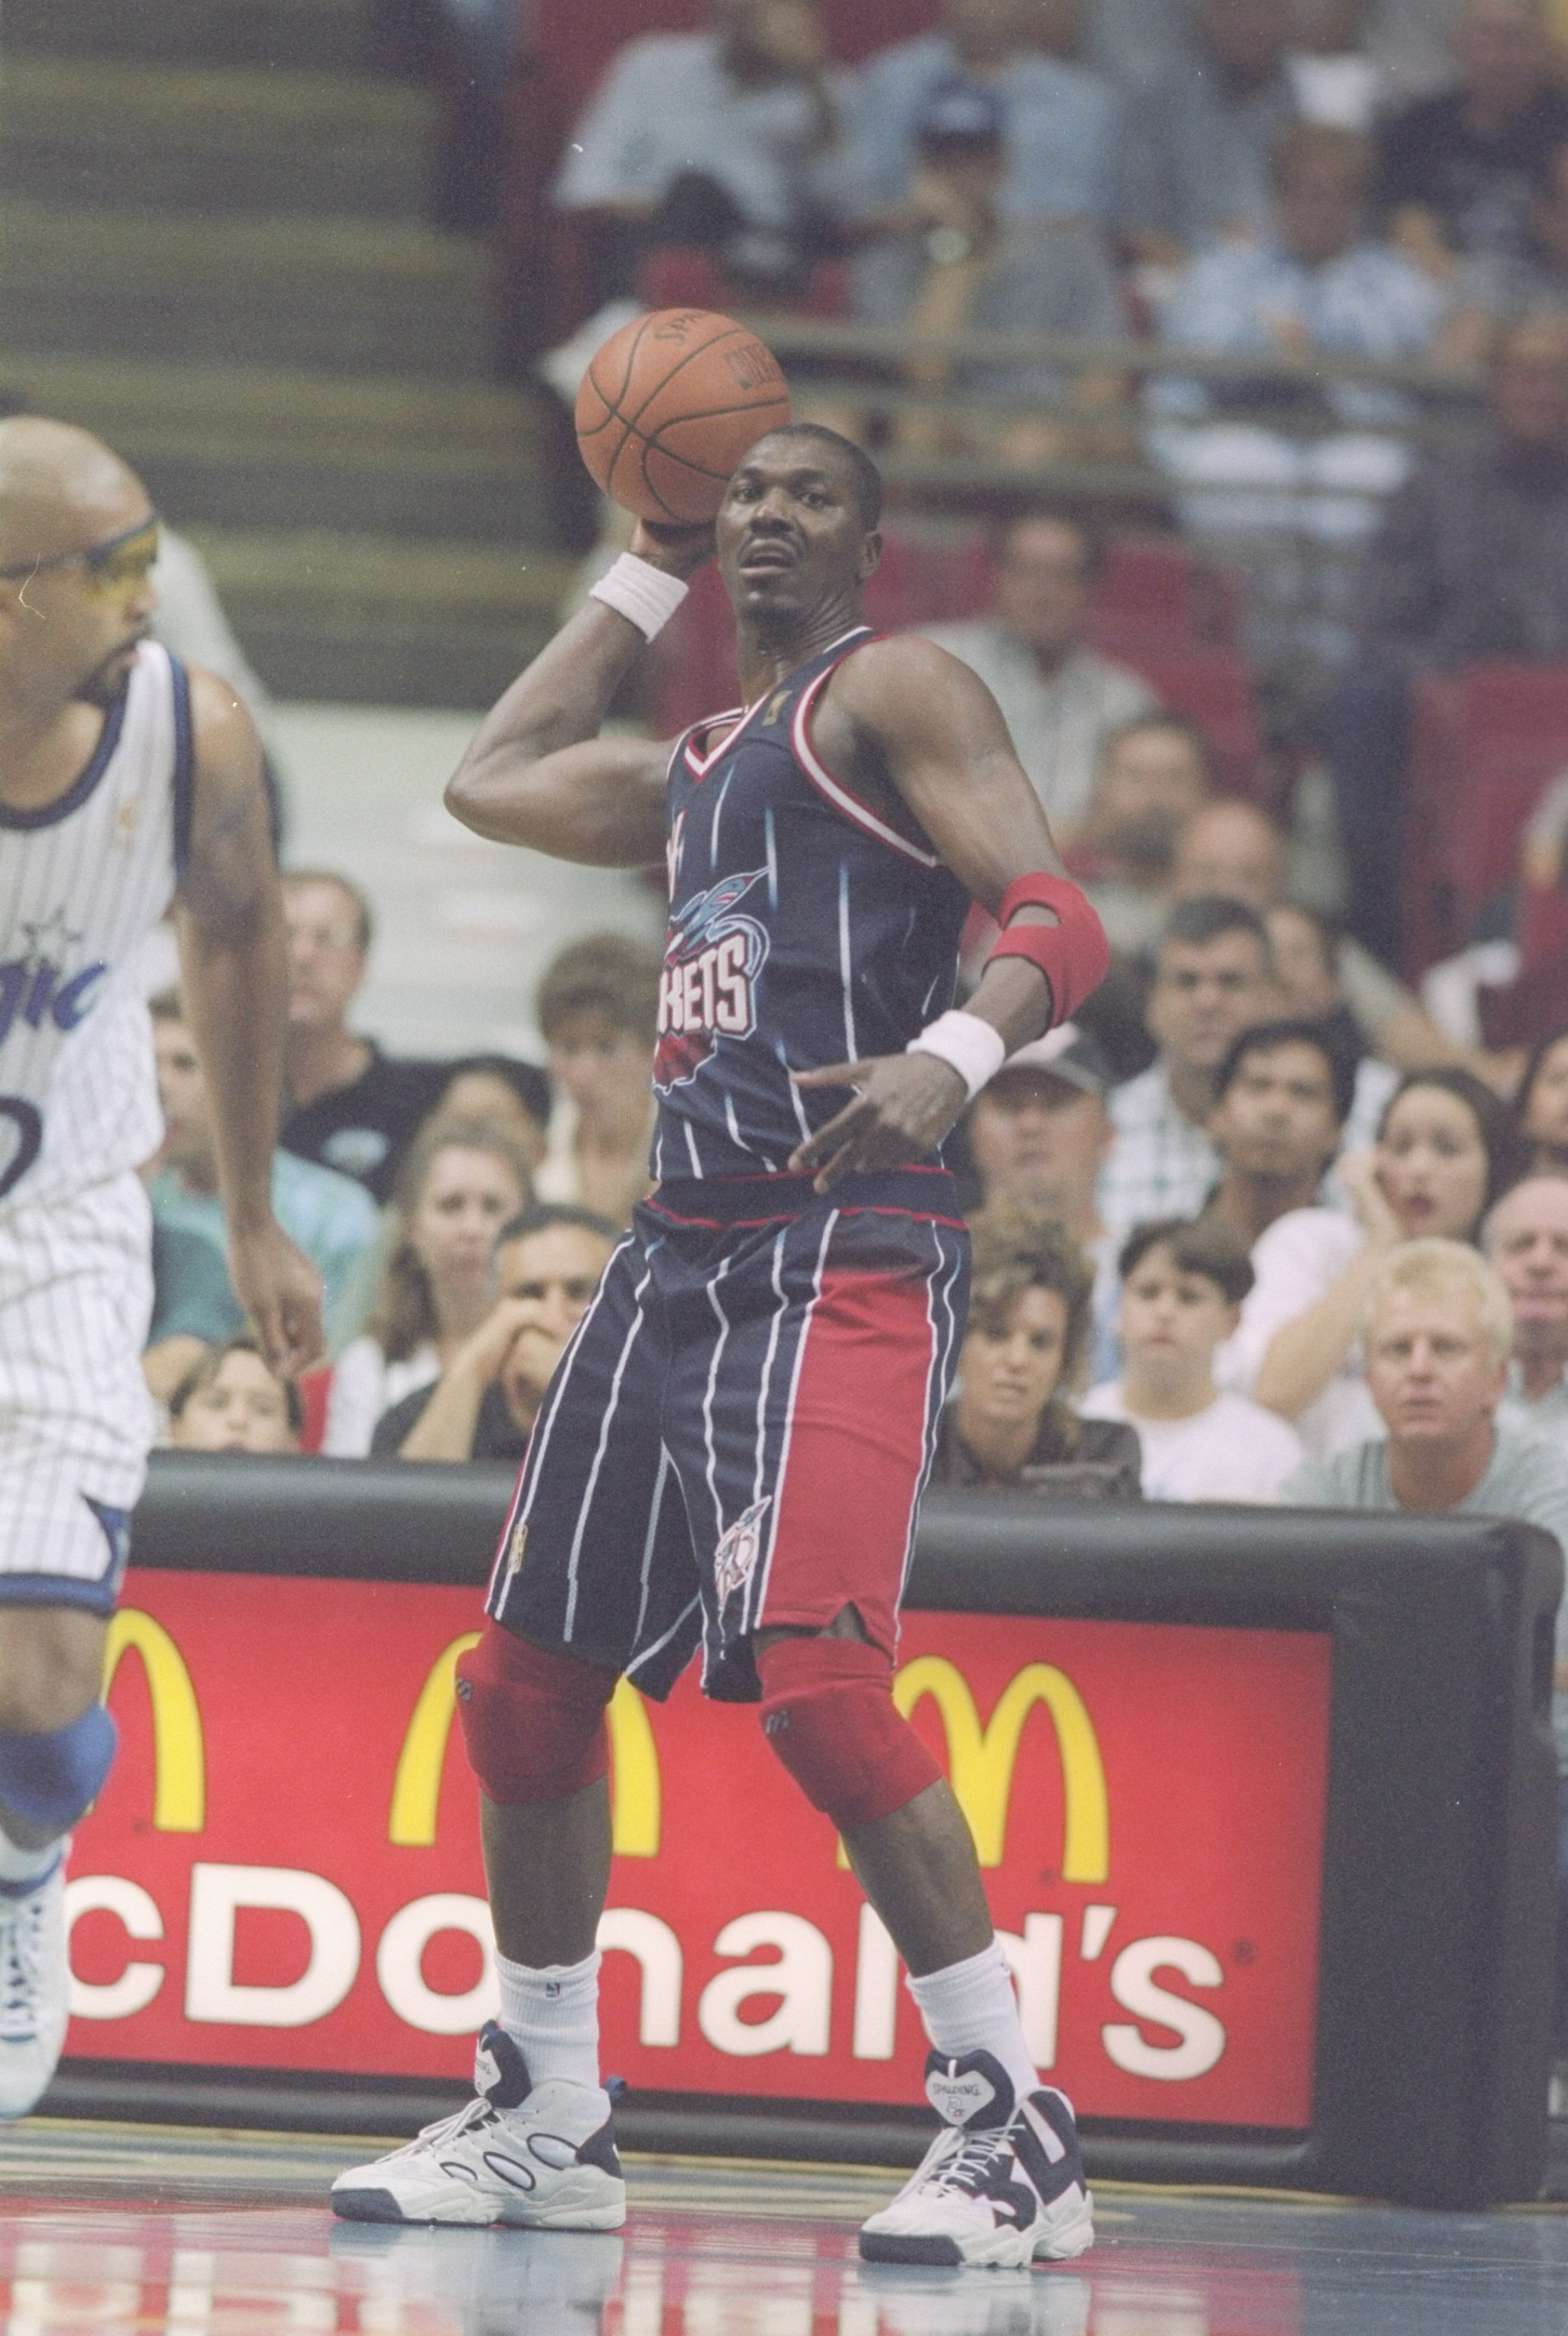 18 Oct 1996: Center Hakeem Olajuwom of the Houston Rockets prepares to pass the ball during a game against the Orlando Magic at Orlando Arena in Orlando, Florida. The Magic won the game 95 - 83.